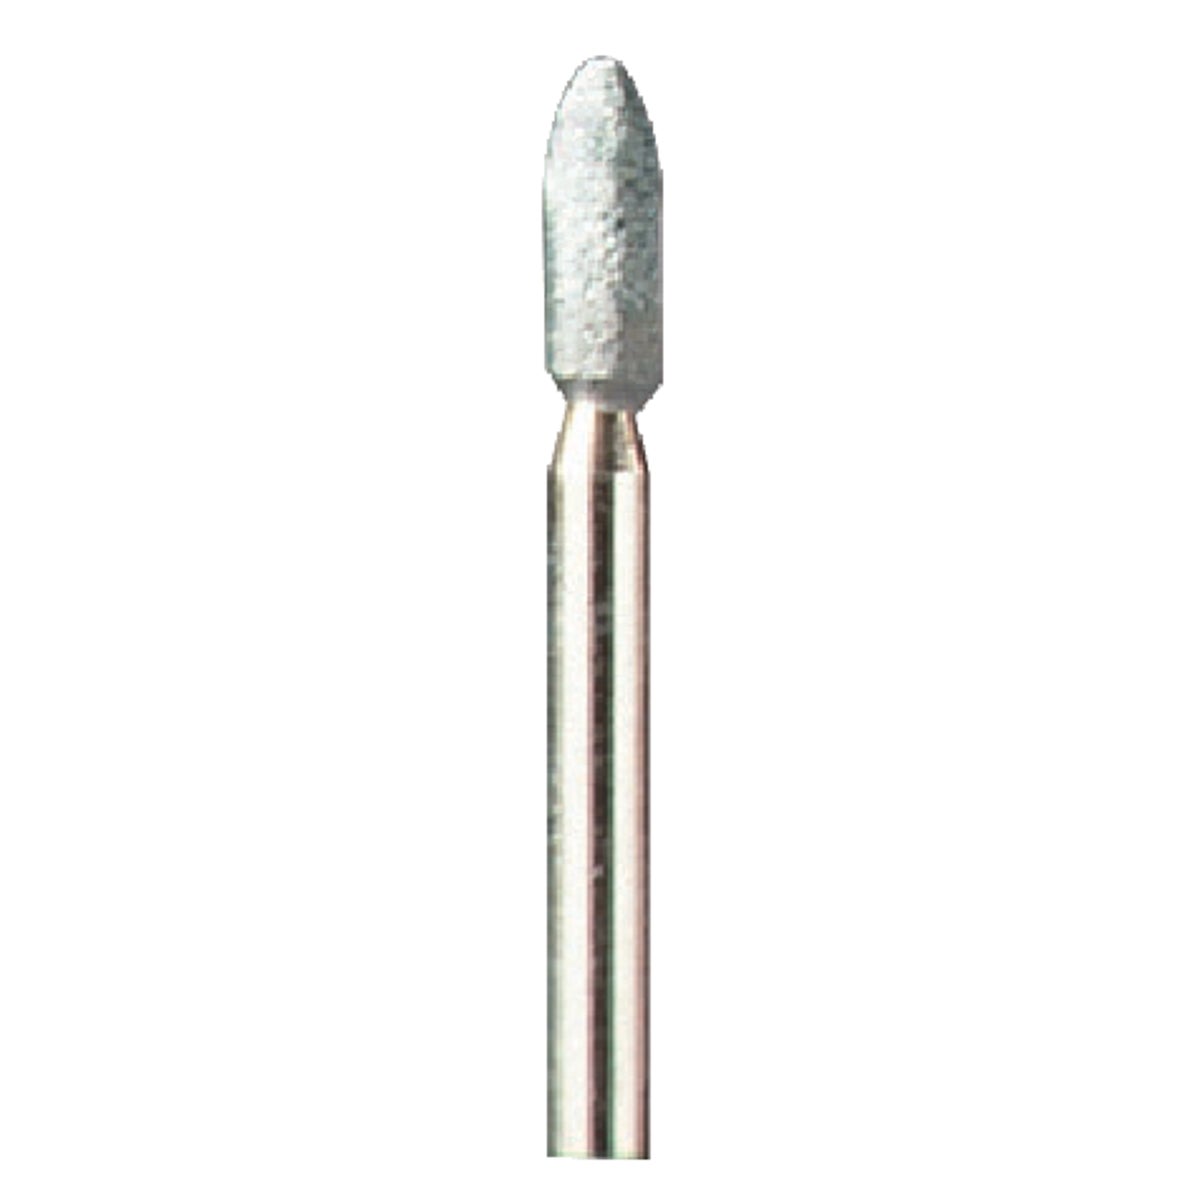 Dremel 1/8 In. Silicon Carbide Grinding Stone